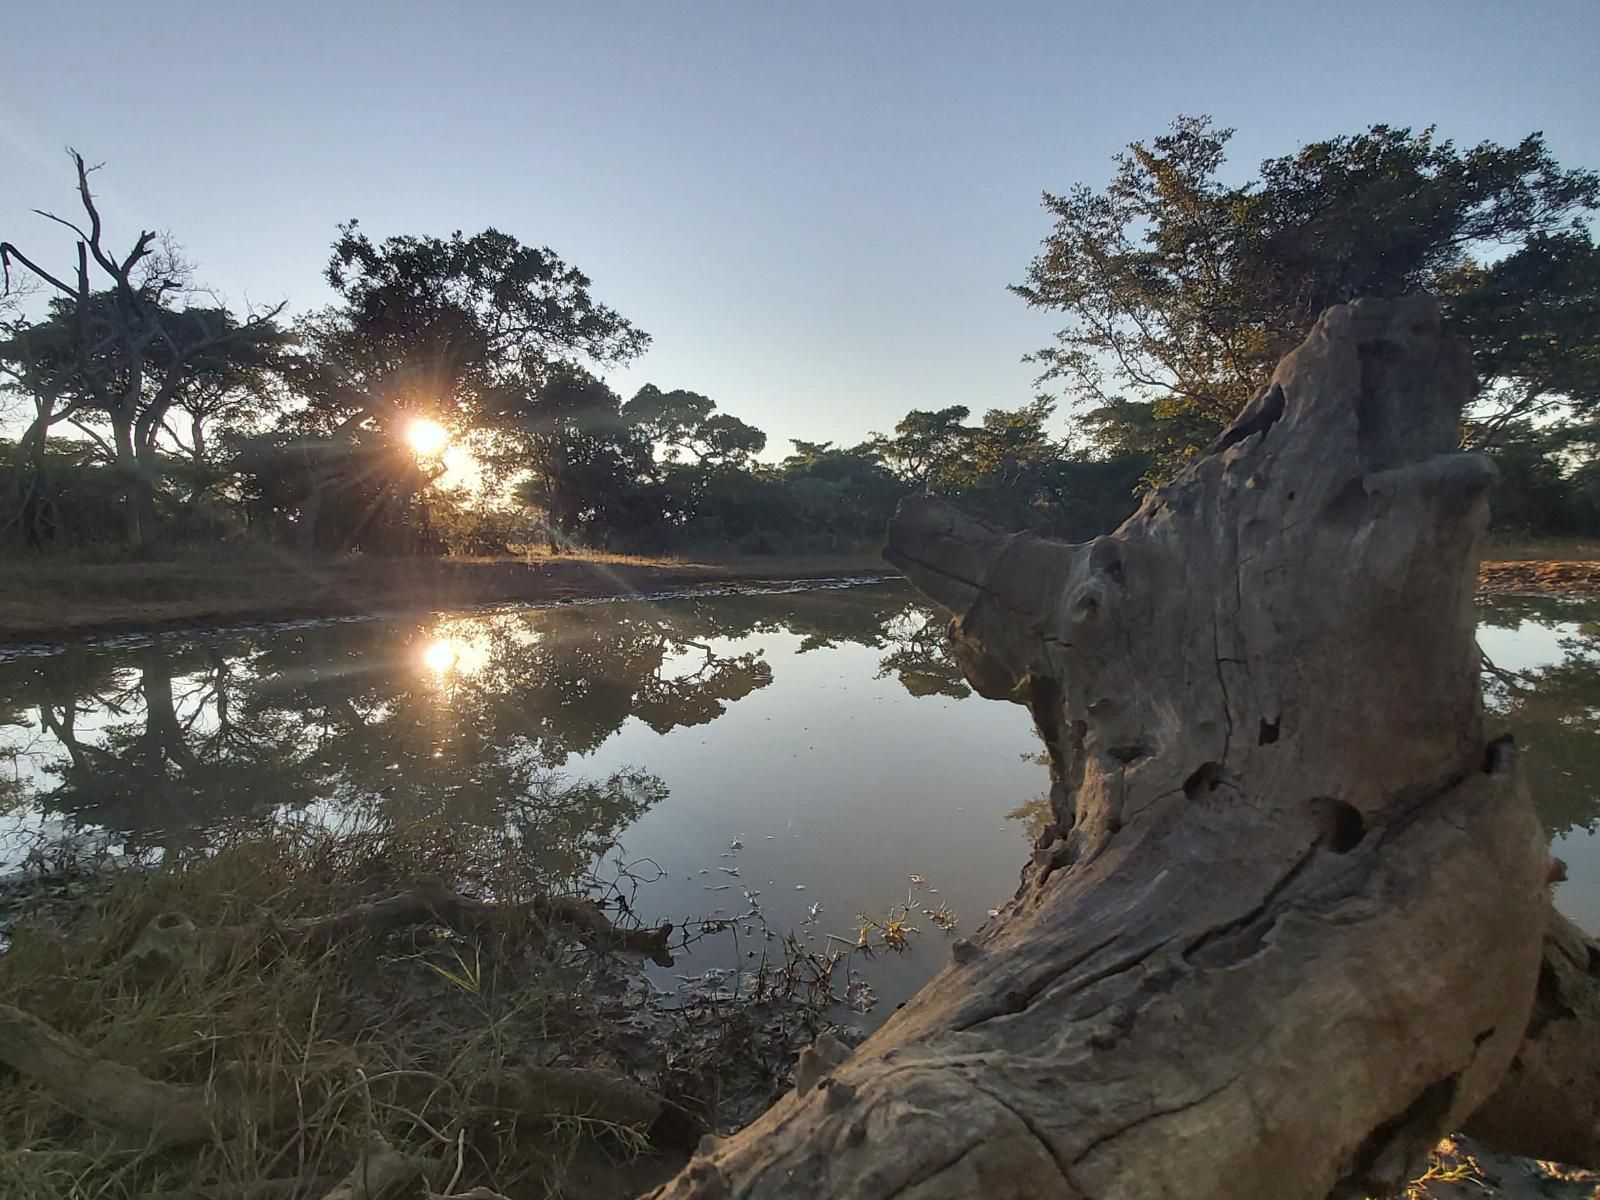 Izintaba Private Game Reserve Vaalwater Limpopo Province South Africa River, Nature, Waters, Tree, Plant, Wood, Sunset, Sky